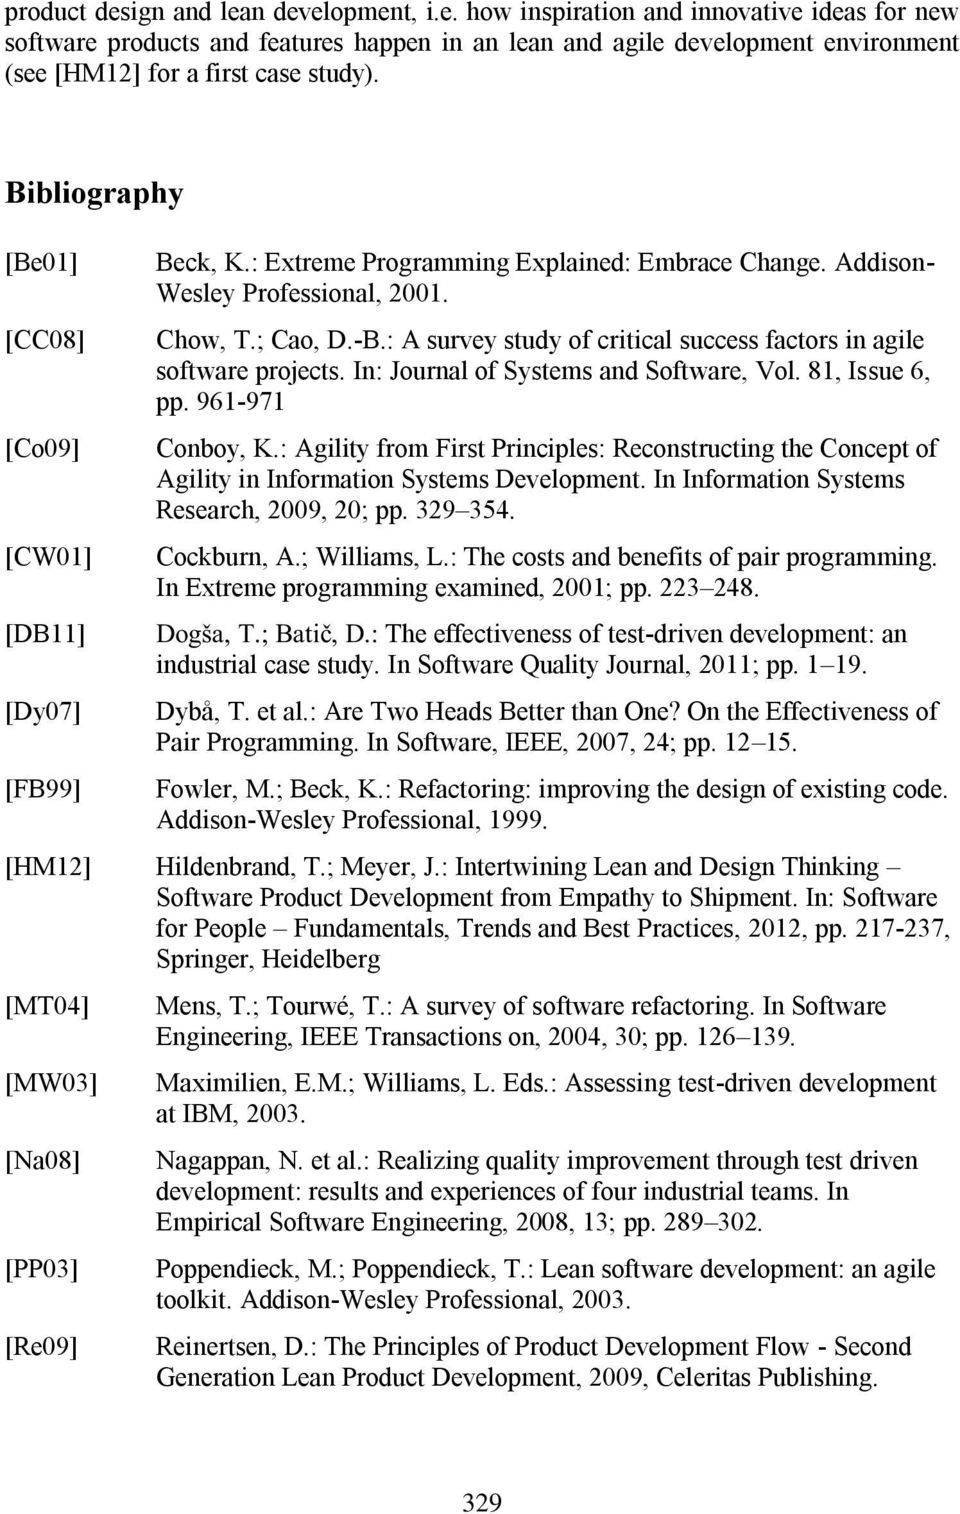 Chow, T.; Cao, D.-B.: Asurveystudyof critical success factors in agile software projects. In:JournalofSystems andsoftware, Vol. 81, Issue6, pp. 961-971 Conboy, K.